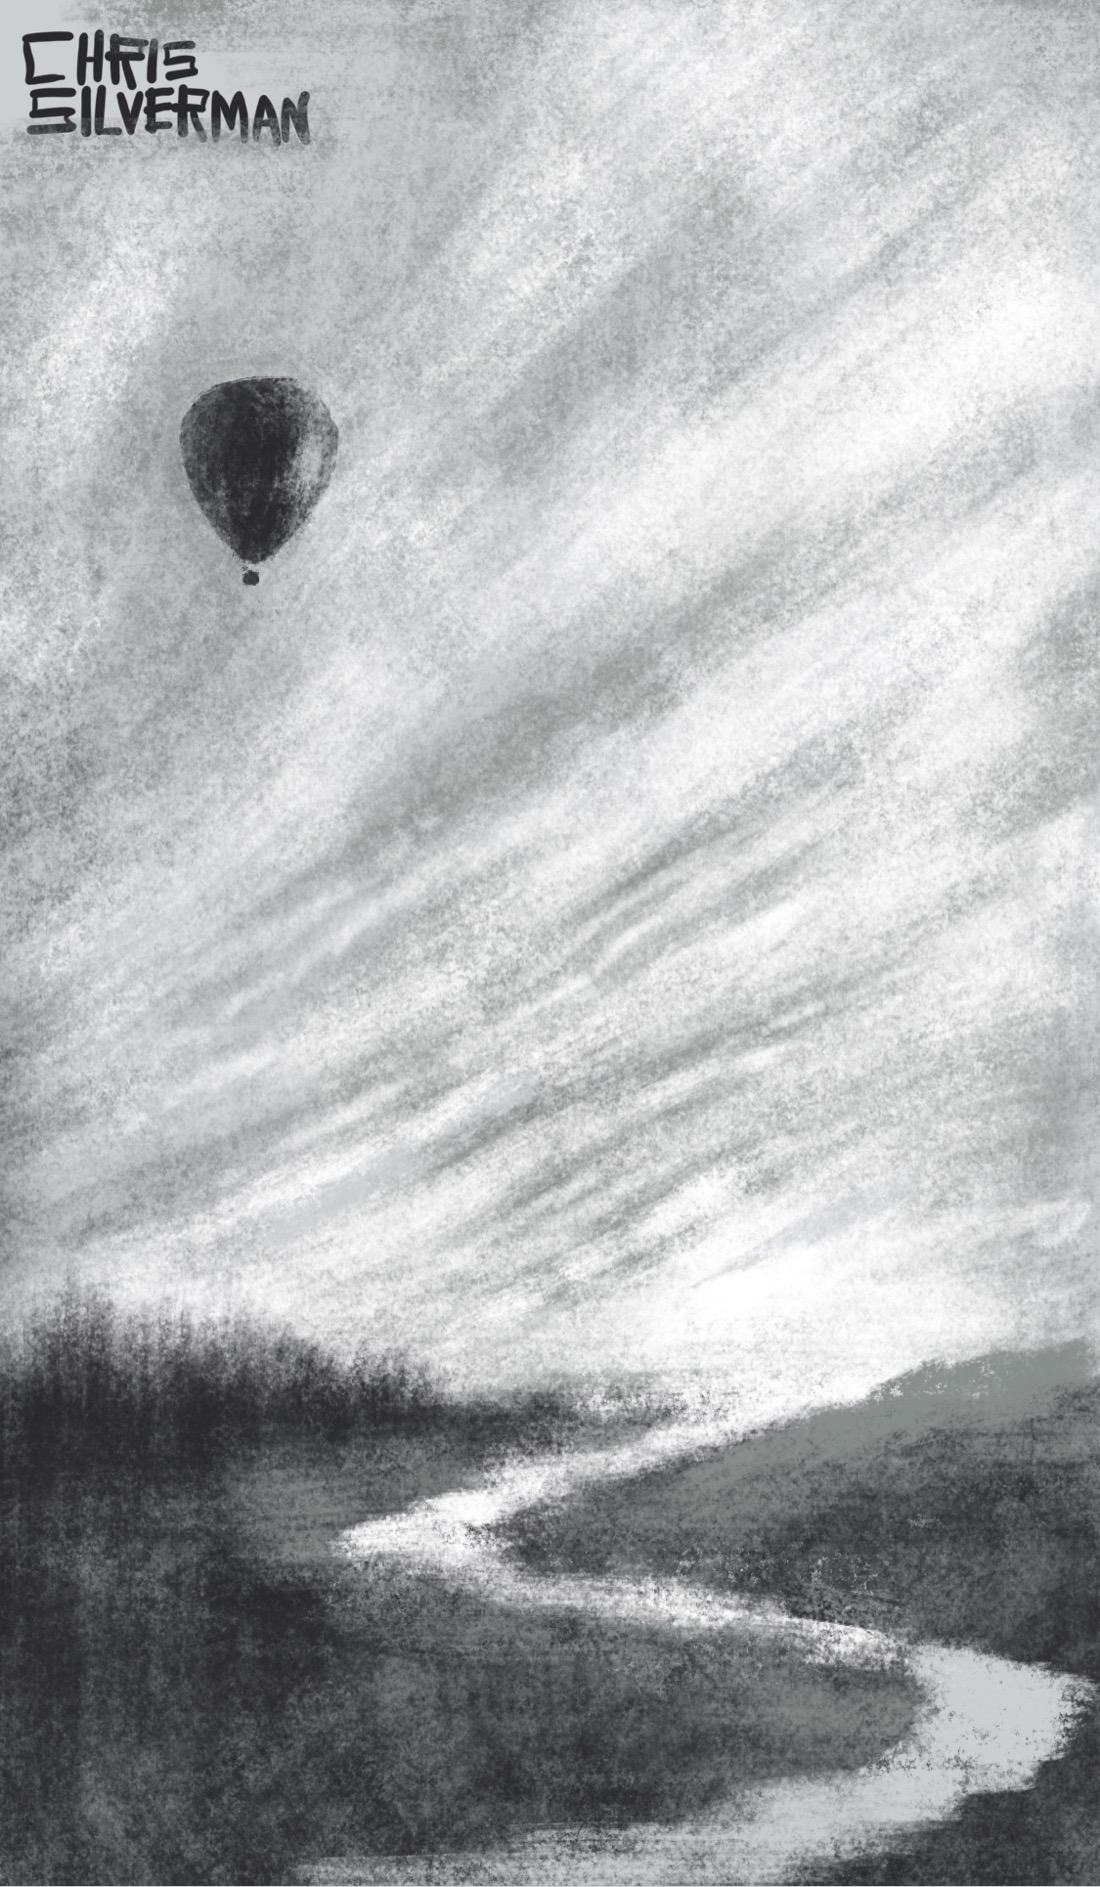 A river winds through a flat meadow with trees on the horizon. Above is a vast, open sky, covered with banded clouds. In the top left of the sky is a black hot-air balloon.